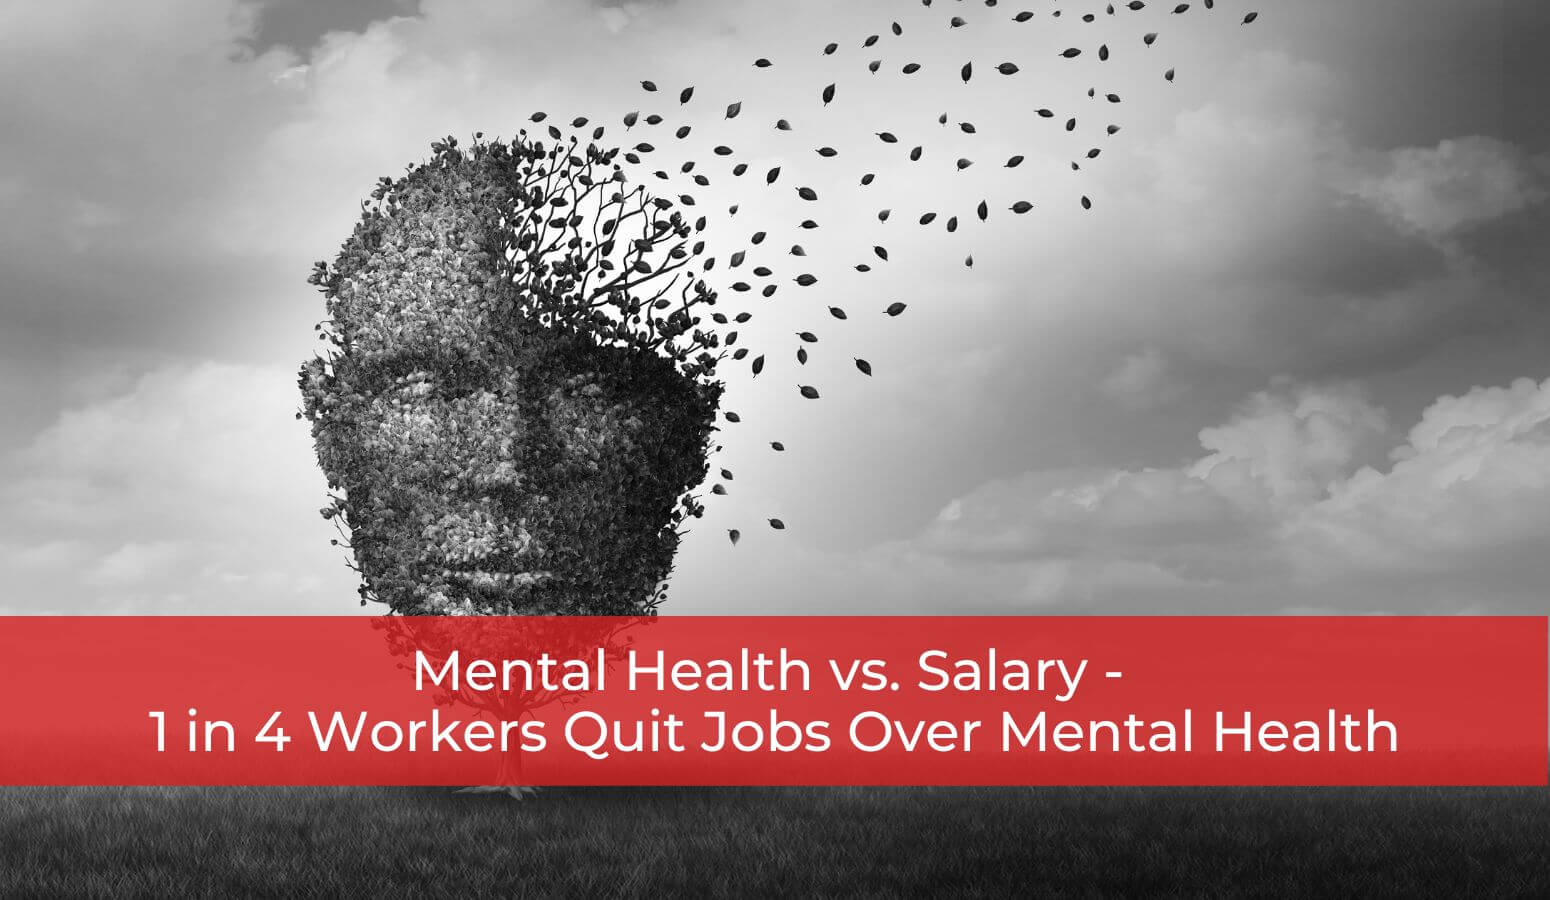 Featured image for “Mental Health vs. Salary – 1 in 4 Workers Quit Jobs Over Mental Health”